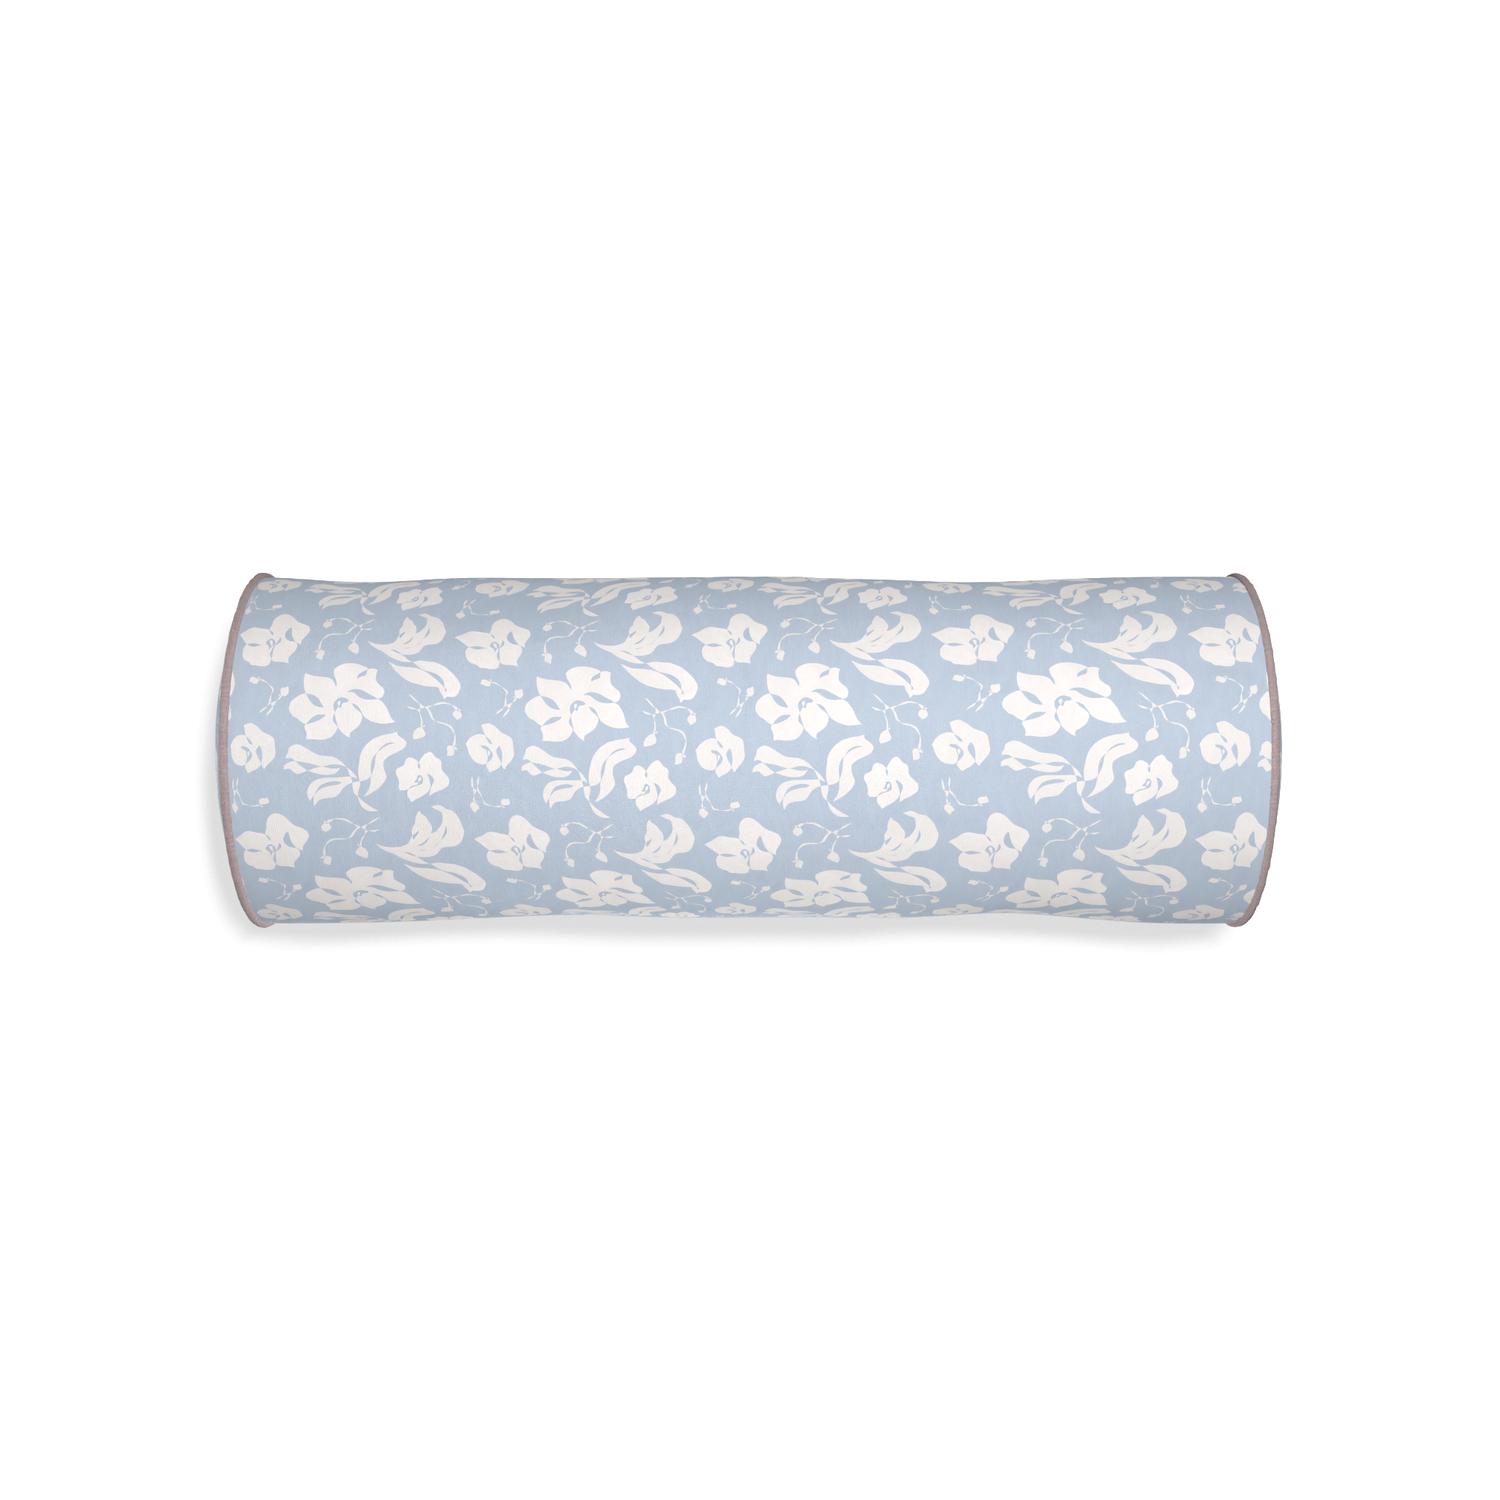 Bolster georgia custom cornflower blue floralpillow with orchid piping on white background